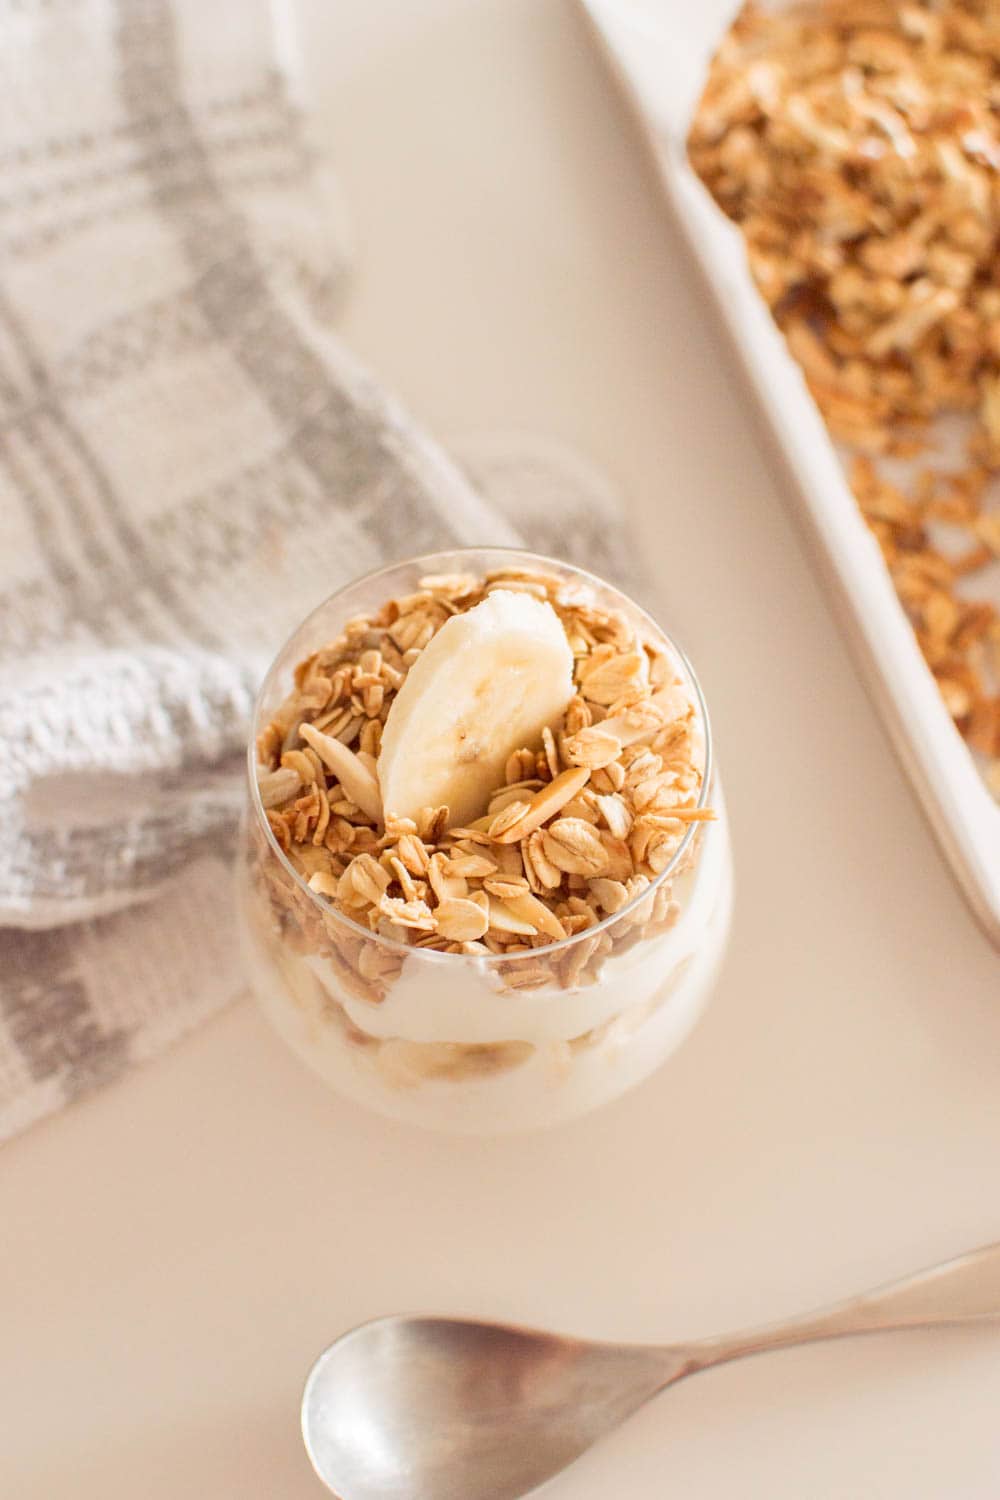 Aerial short of homemade granola served on top of yogurt and topped with a banana